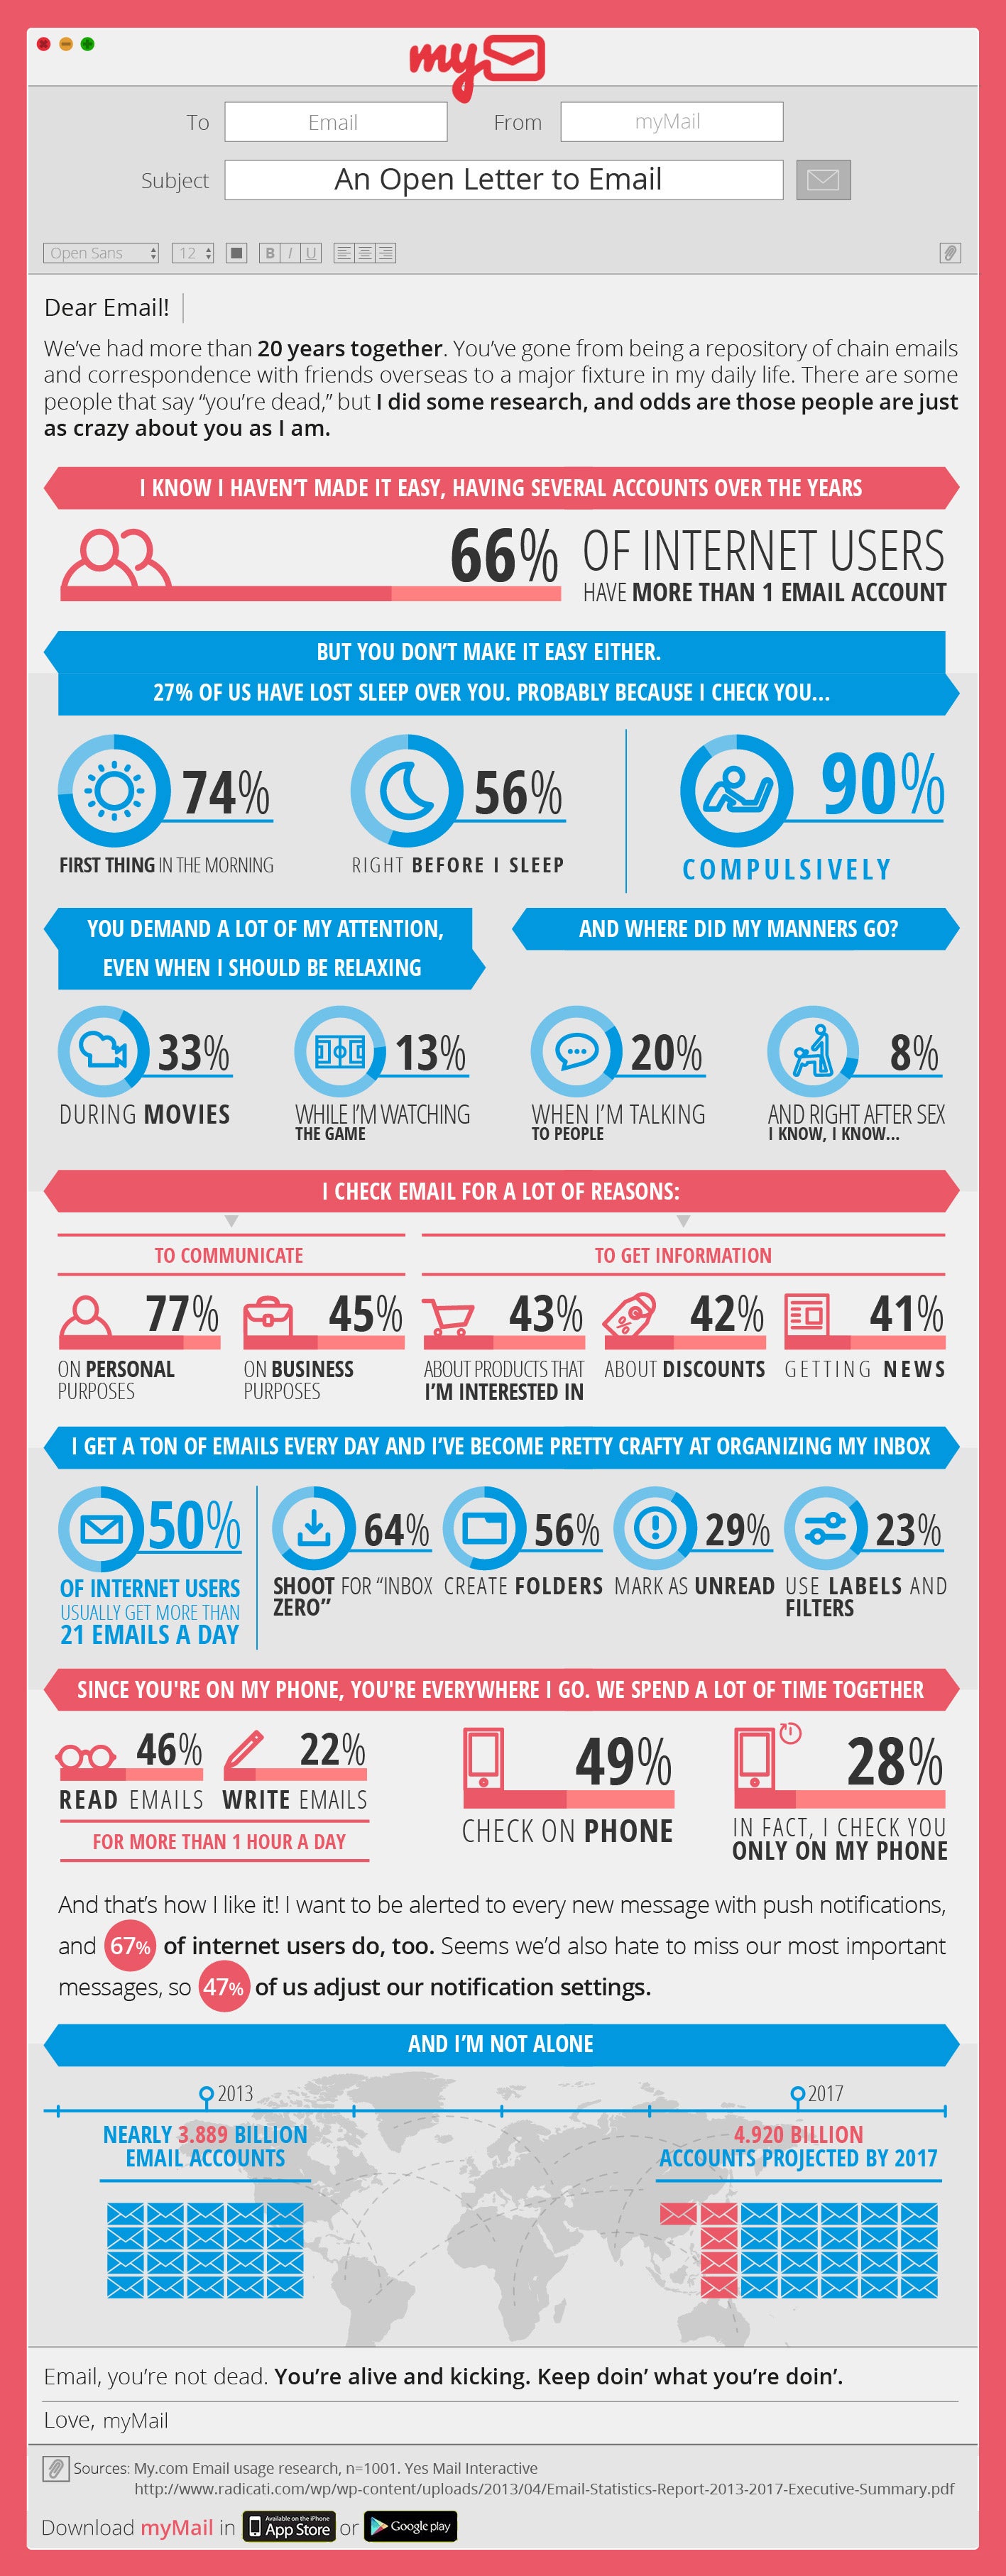 Social Media Is Hot But Email Packs Digital Marketing Power (Infographic)